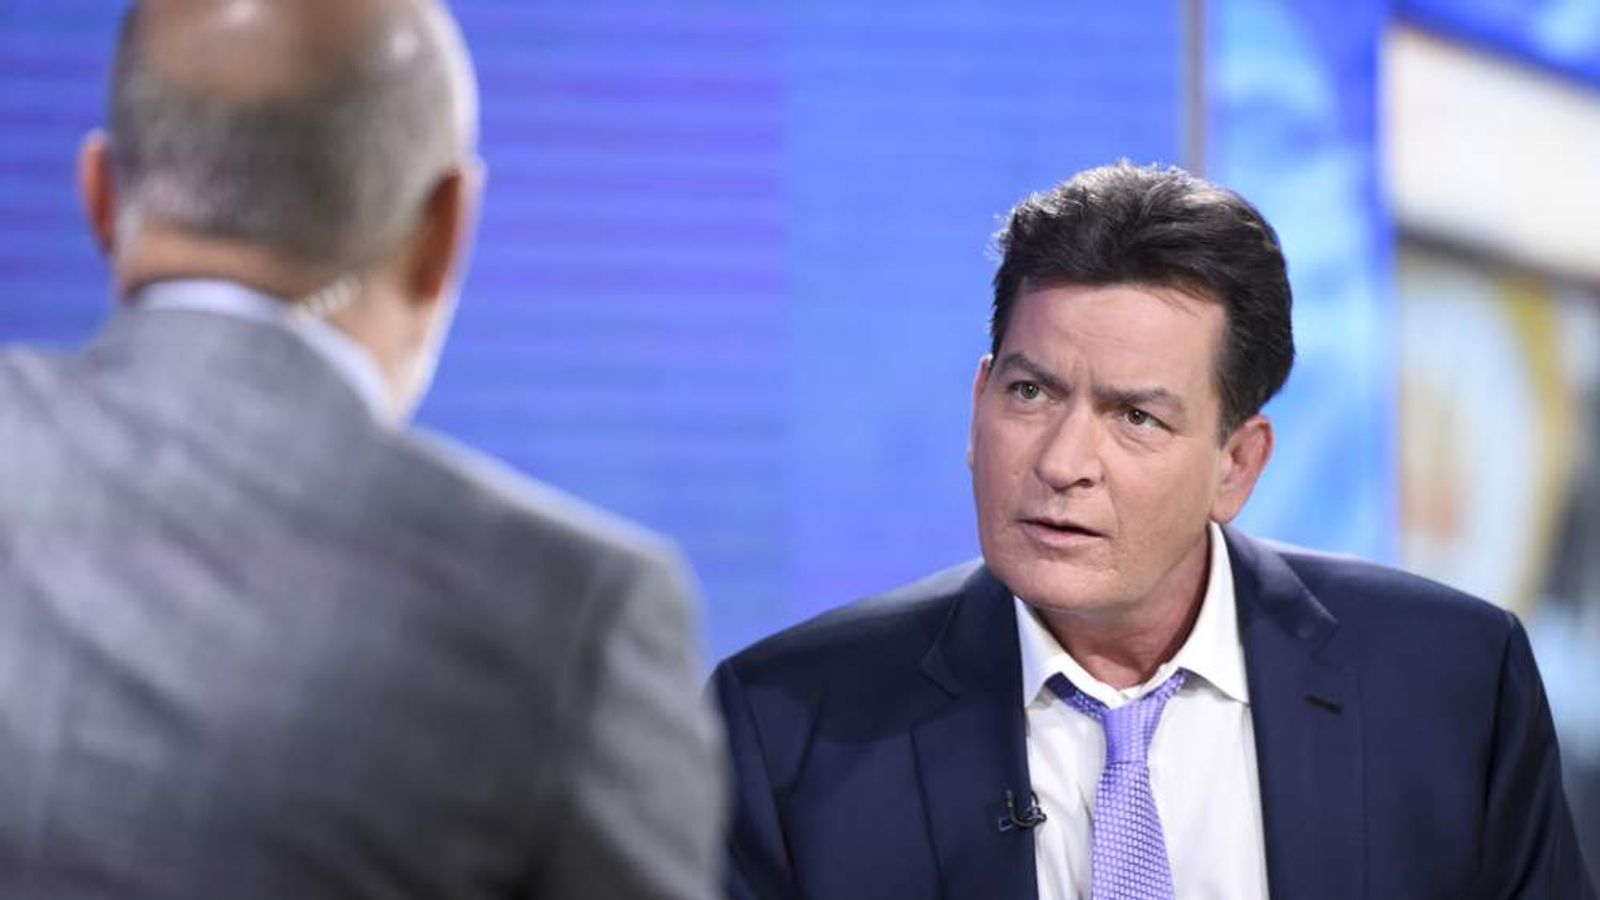 Charlie Sheen Sued By Ex After HIV Interview Ents and Arts News Sky News pic